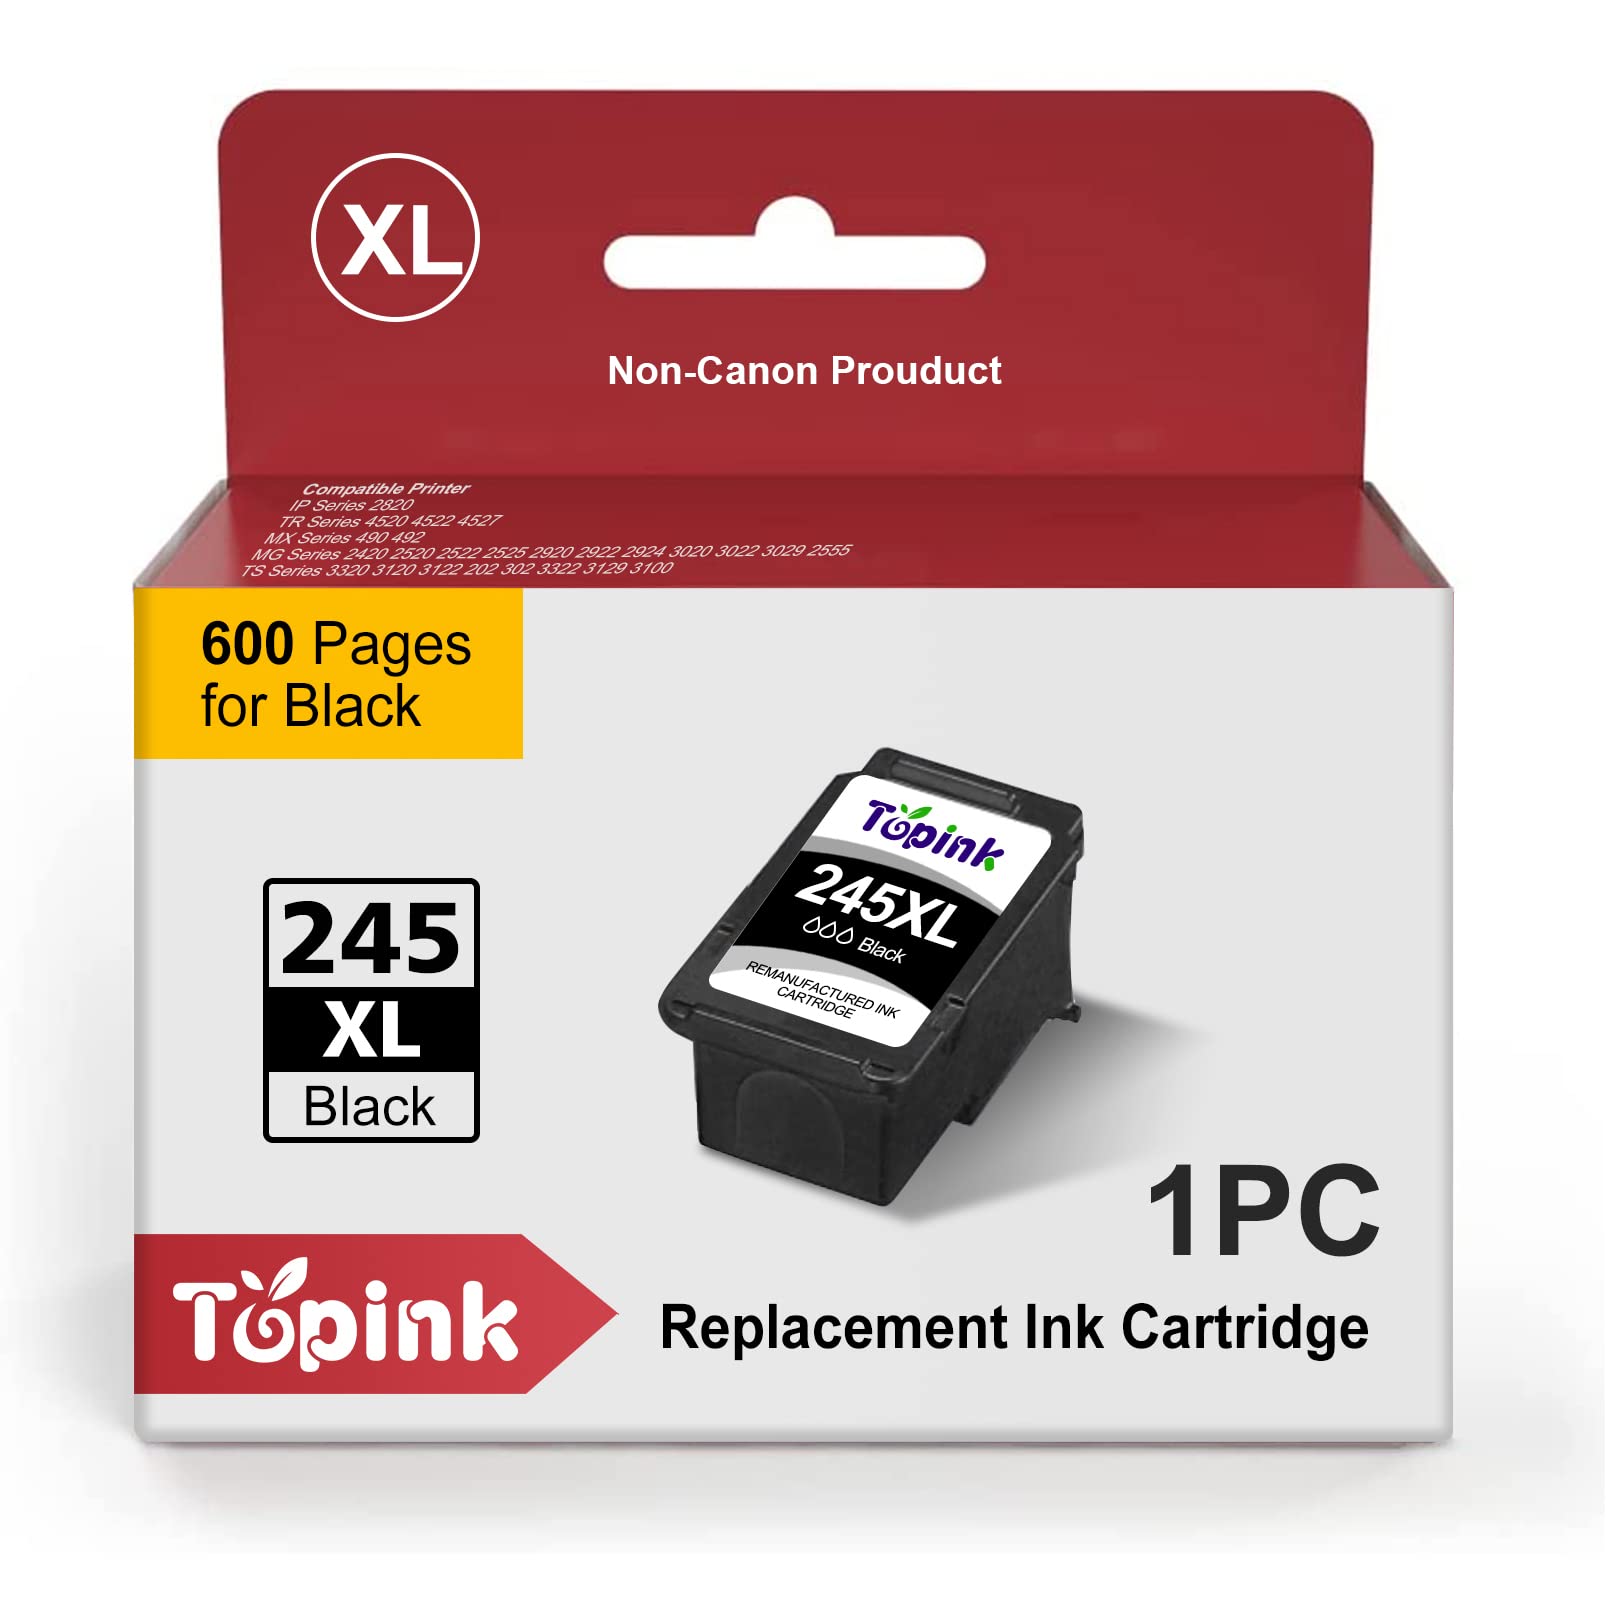 Printer Ink 245 Black XL Ink Cartridge for Canon Pixma PG-245 PG-245XL PG 245 XL PG 243 PG-243 Fine Cartridge Replacement for Cannon MX490 MX492 MG2522 TS3100 TS3122 TS3300 TS3322 TS3320 TR4520